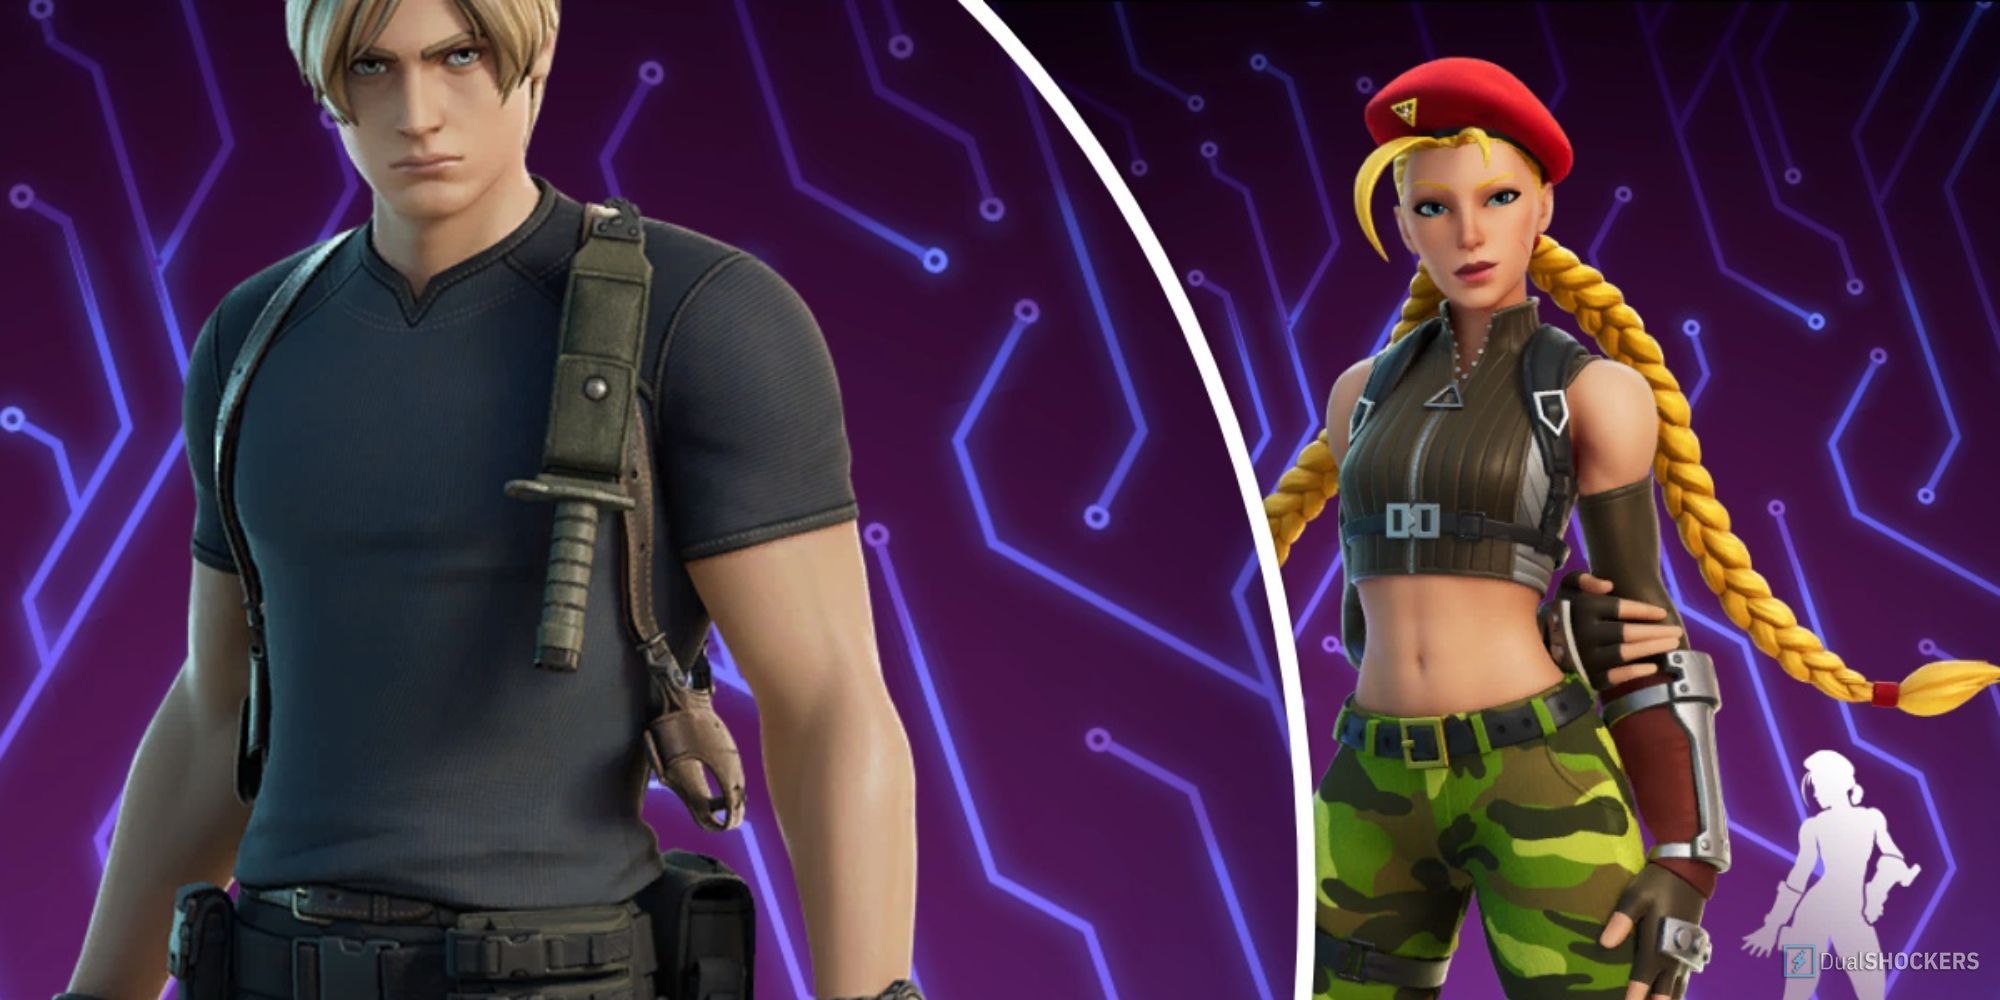 CAMMY COMBOS  FORTNITE SKIN REVIEW 